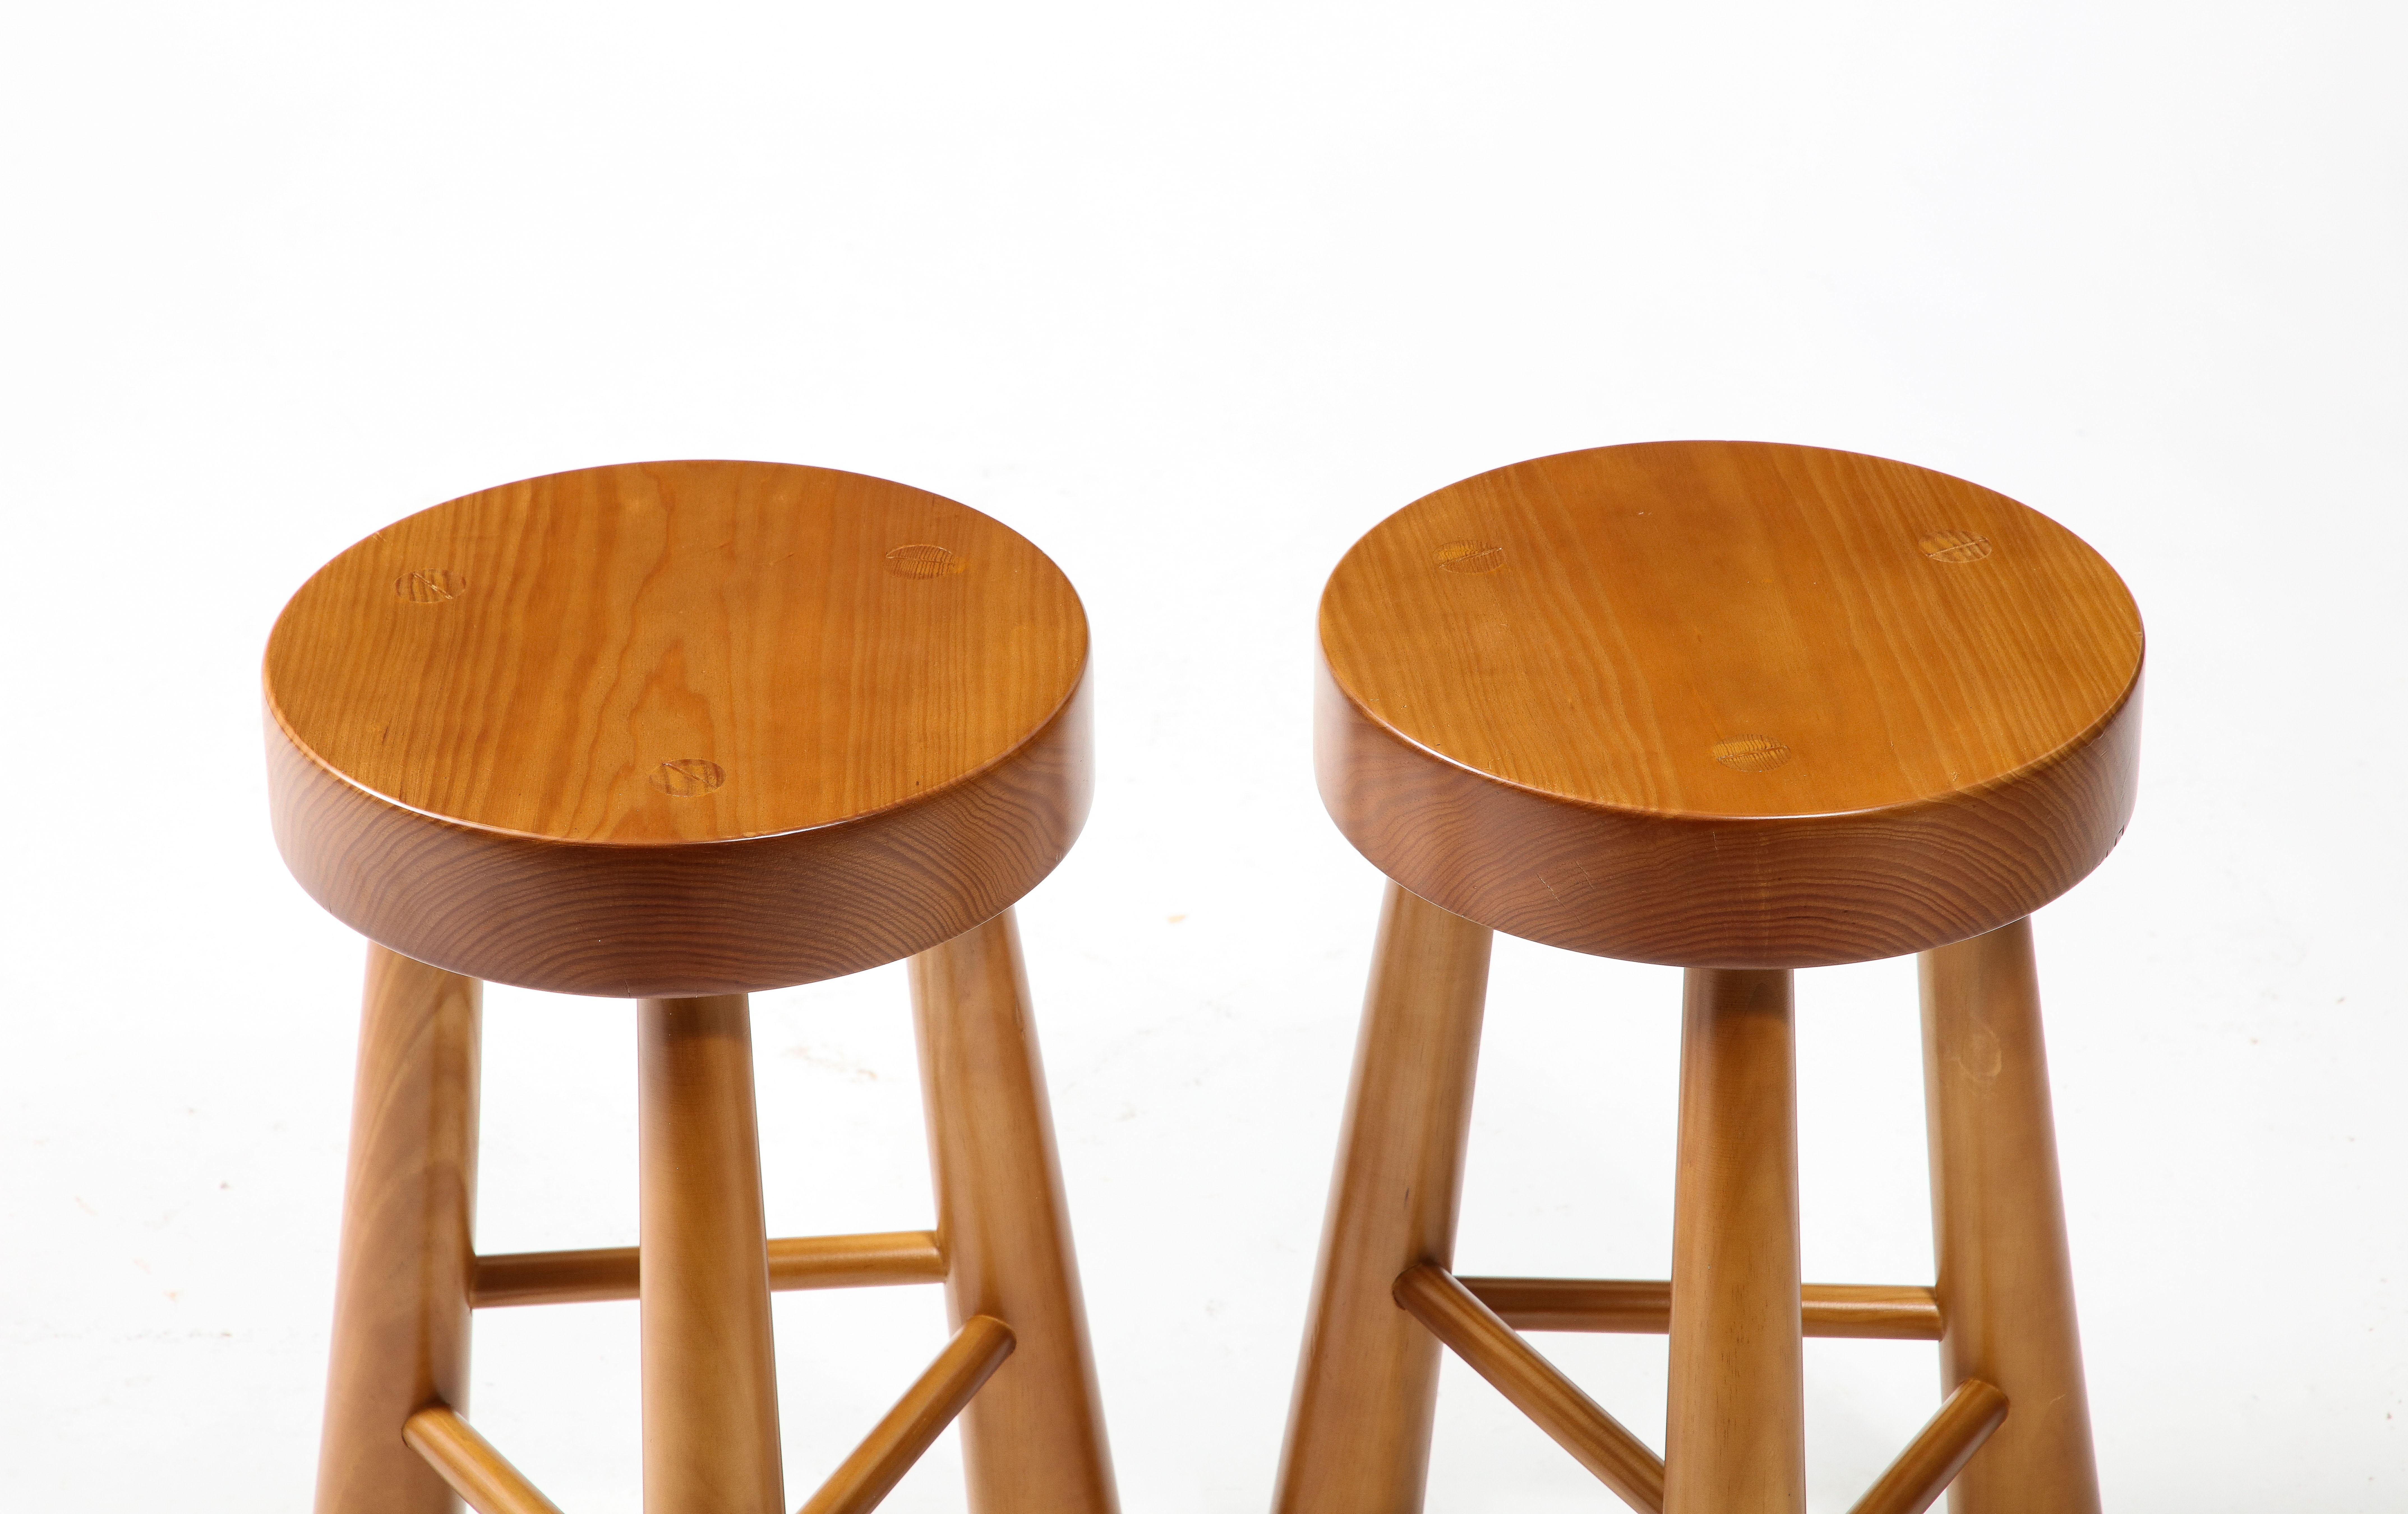 Solid pinewood tripod stool with truncoid shaped legs and dovetail mounting by Facto Atelier Paris, sold in pairs. Current production, made in France. Light neutral varnish finish. 